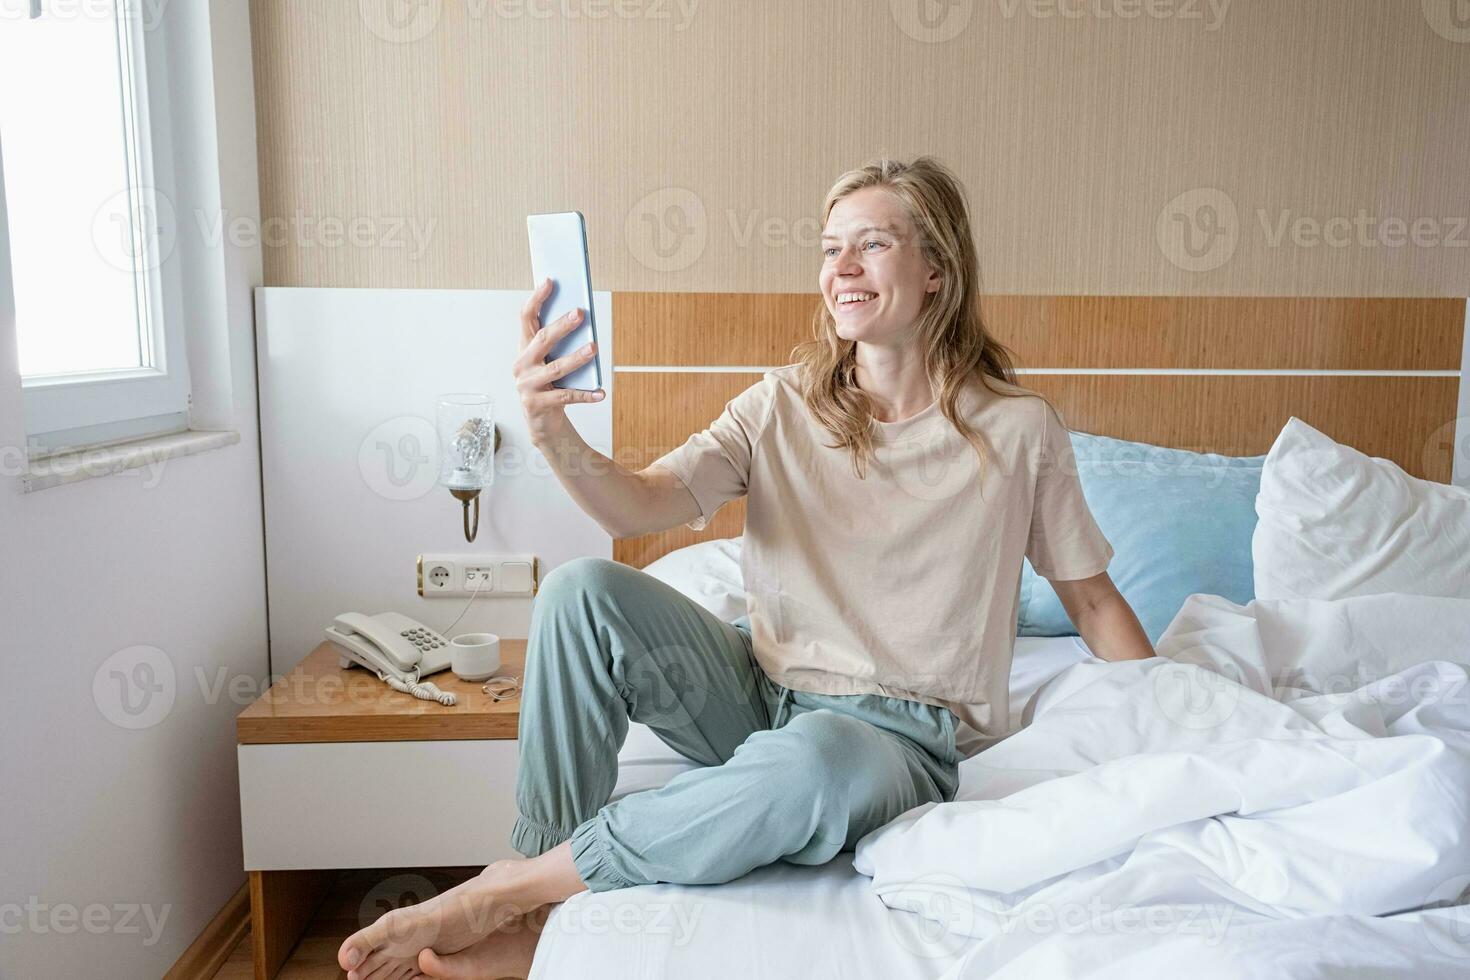 Woman using smartphone lying in bed photo